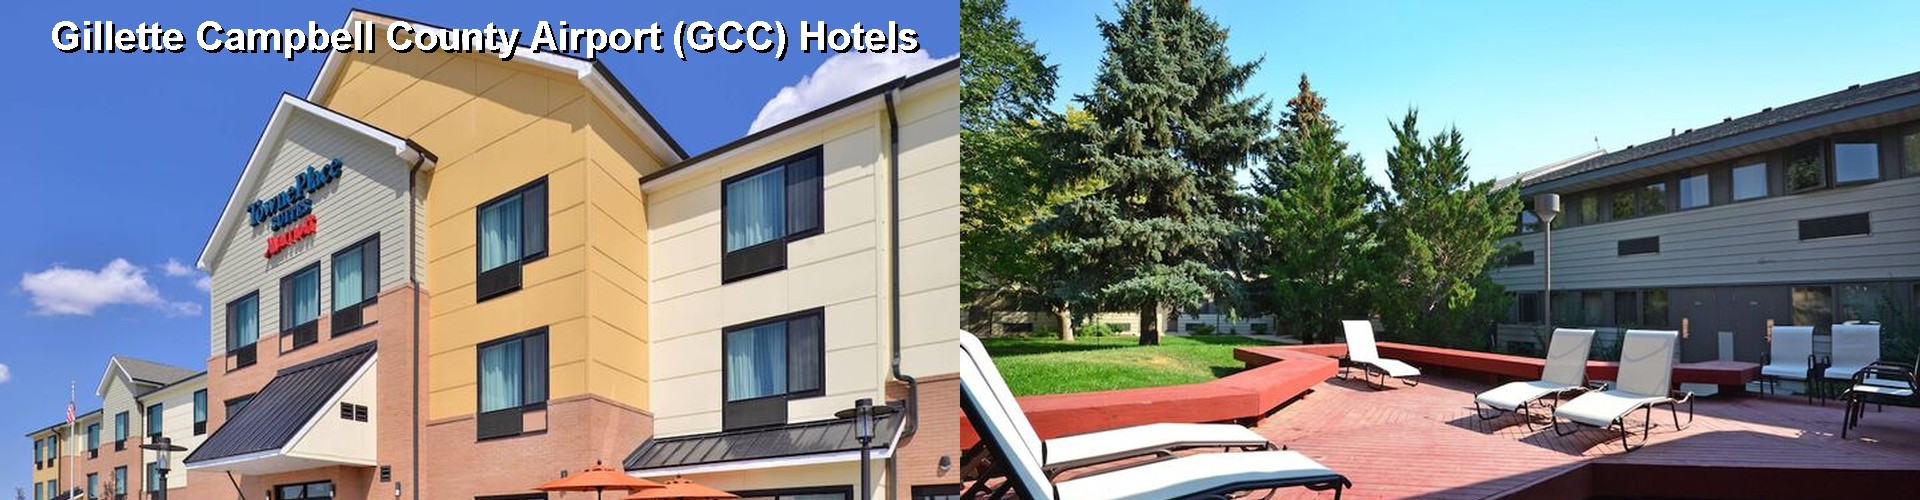 5 Best Hotels near Gillette Campbell County Airport (GCC)